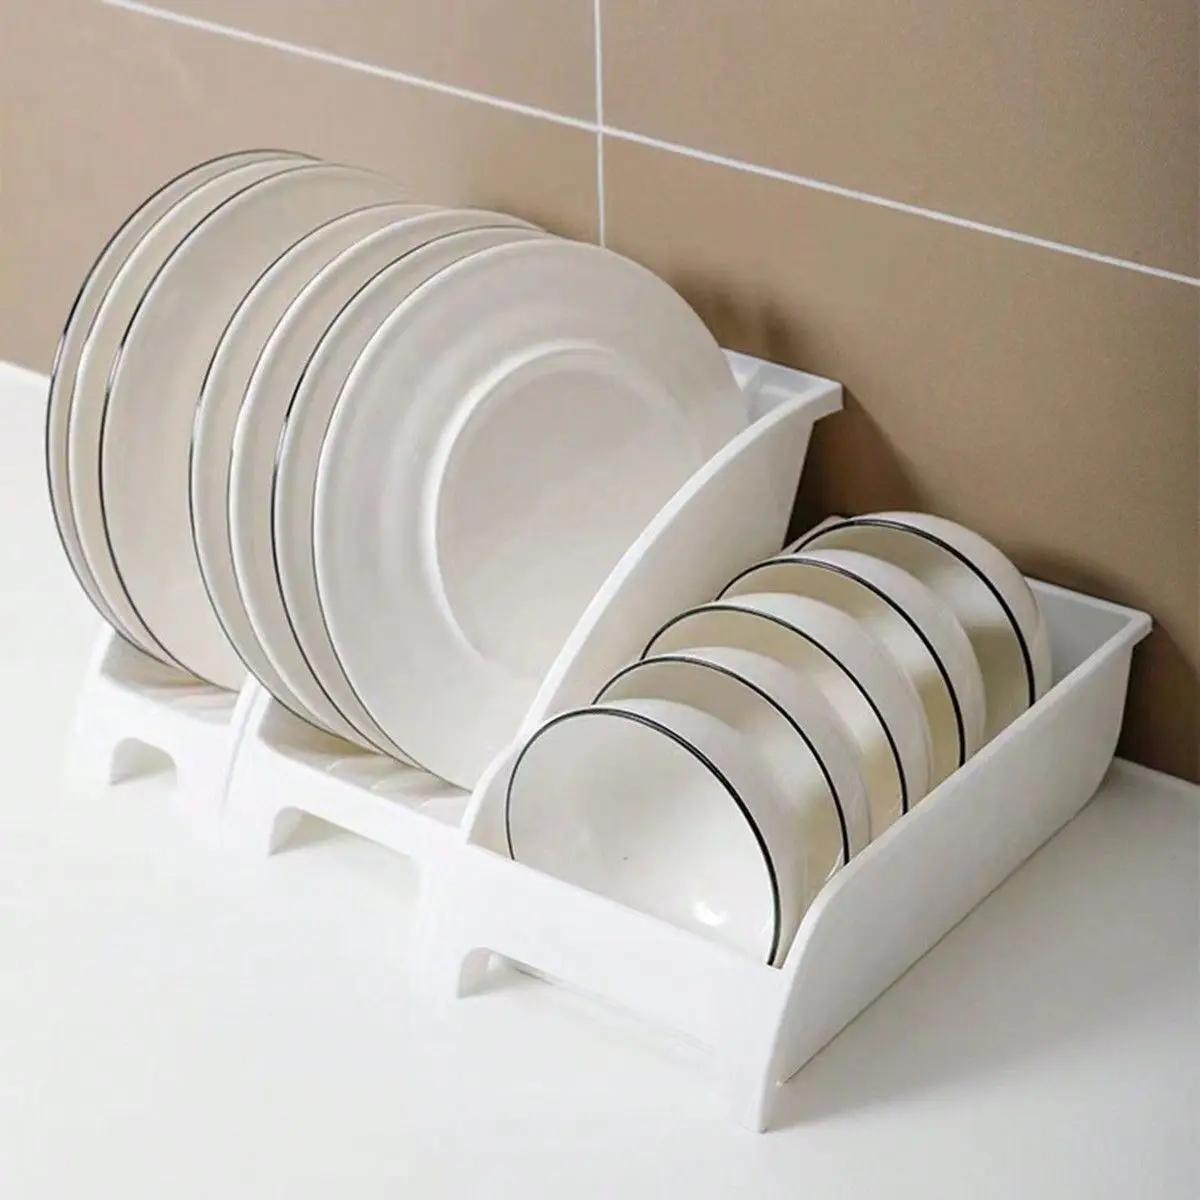 

1pc Dish Rack, Countertop Vertical Dish Drying Rack, Multifunctional Dish Storage Holder, For Kitchen Counter, Cabinet, Drawer And Shelf, Kitchen Organizers And Storage, Kitchen Accessories